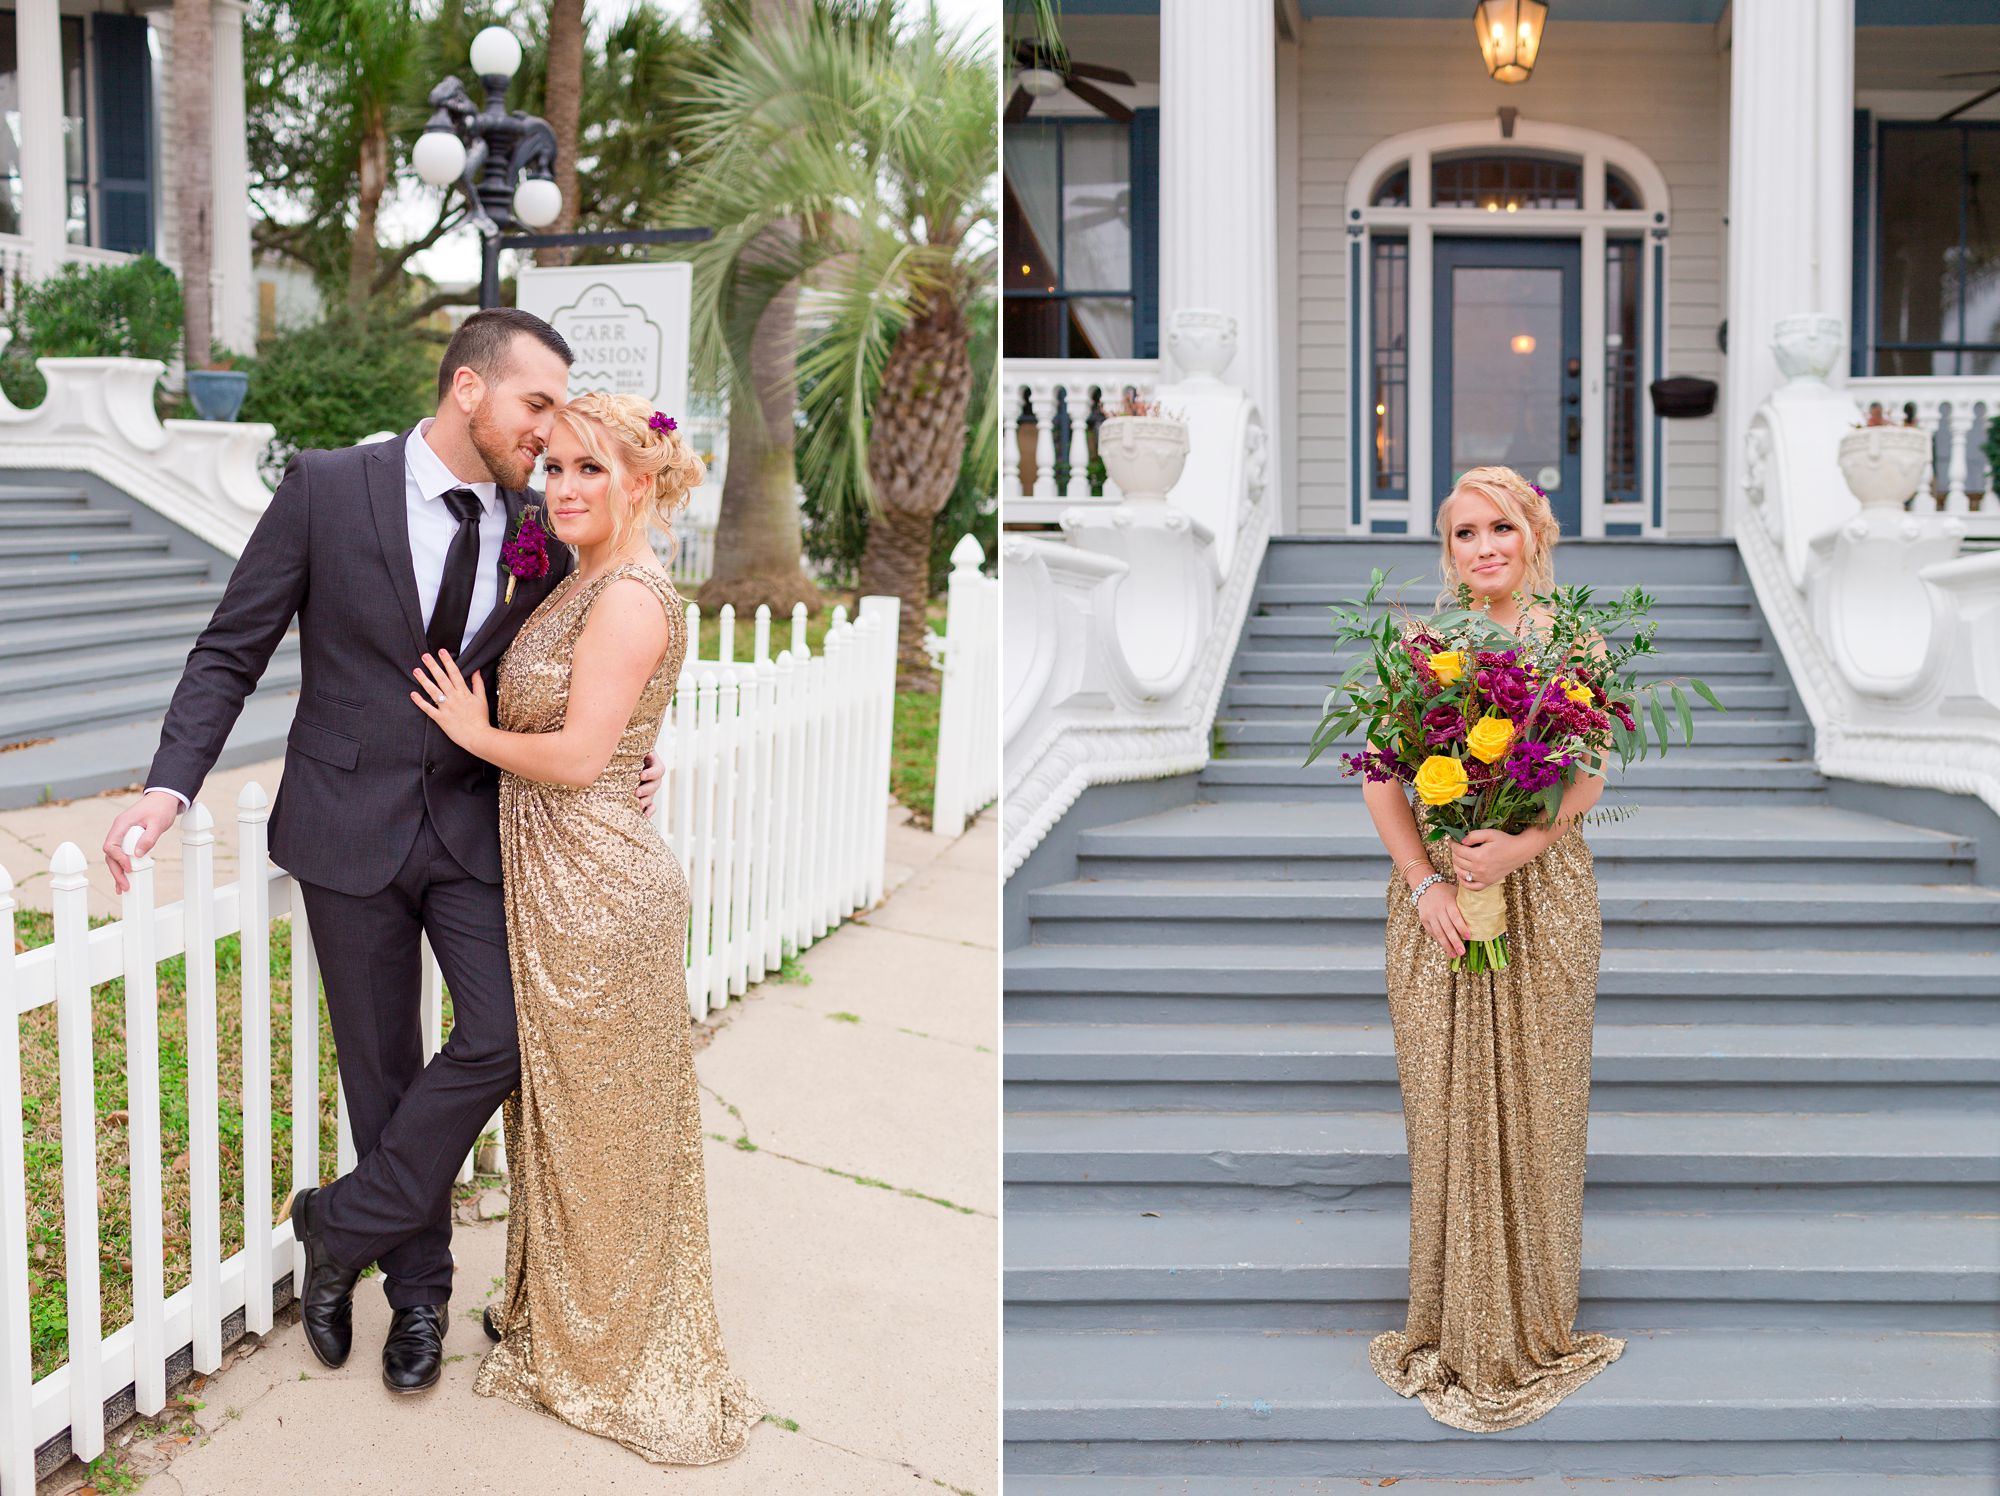 Portrait of a bride and groom in front of the Carr Mansion in Galveston, Texas.